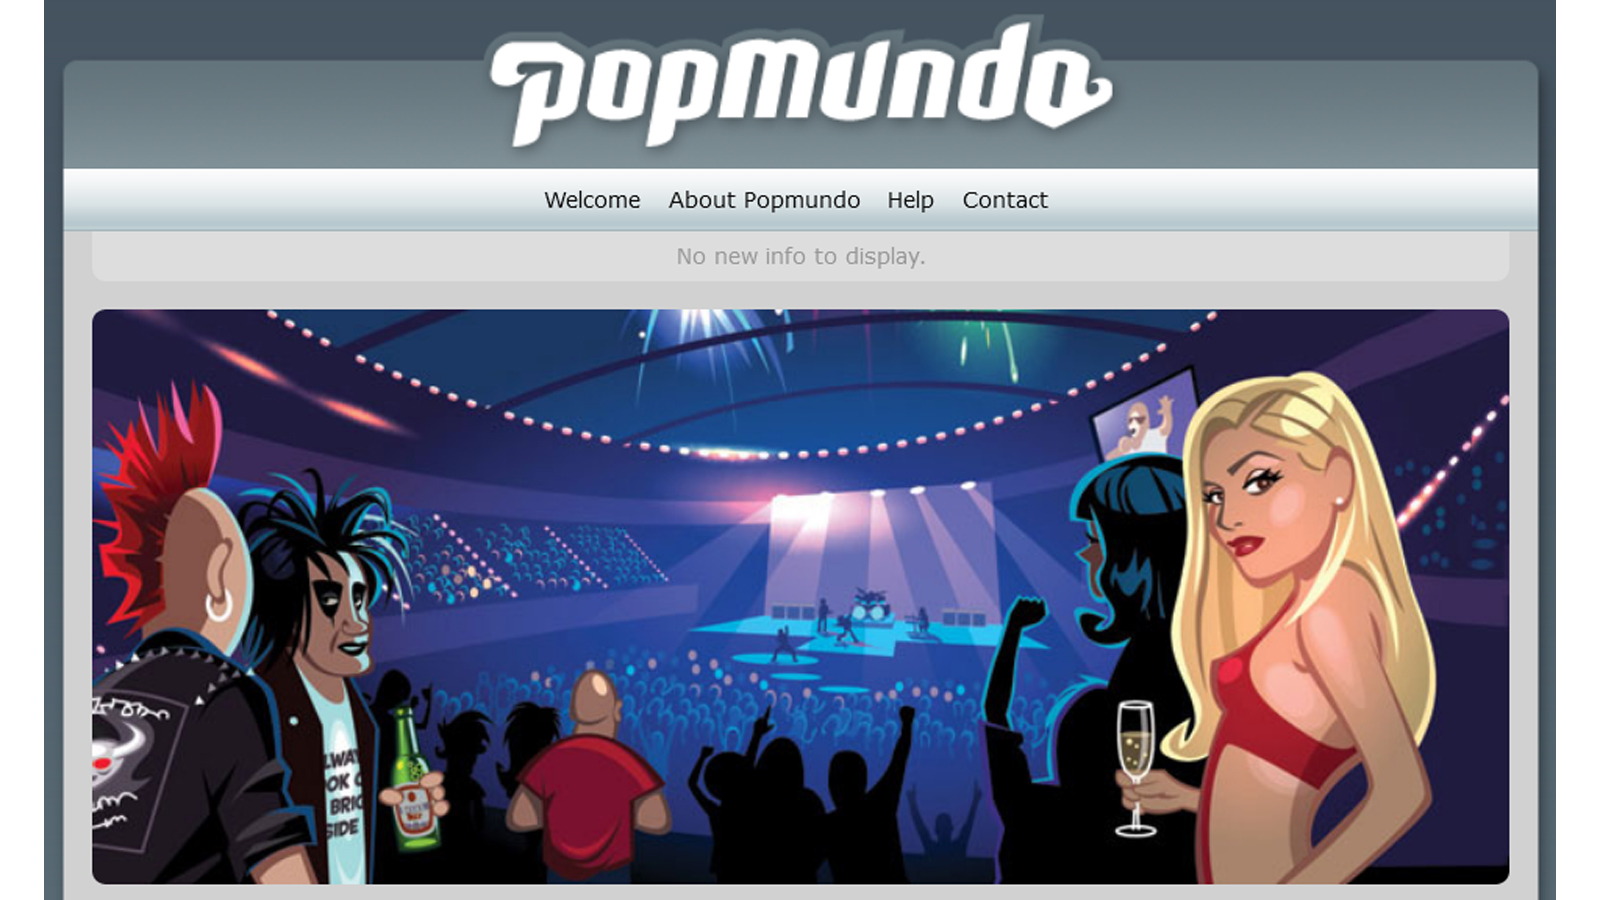 Get feedback from a vast remote working audience about Popmundo